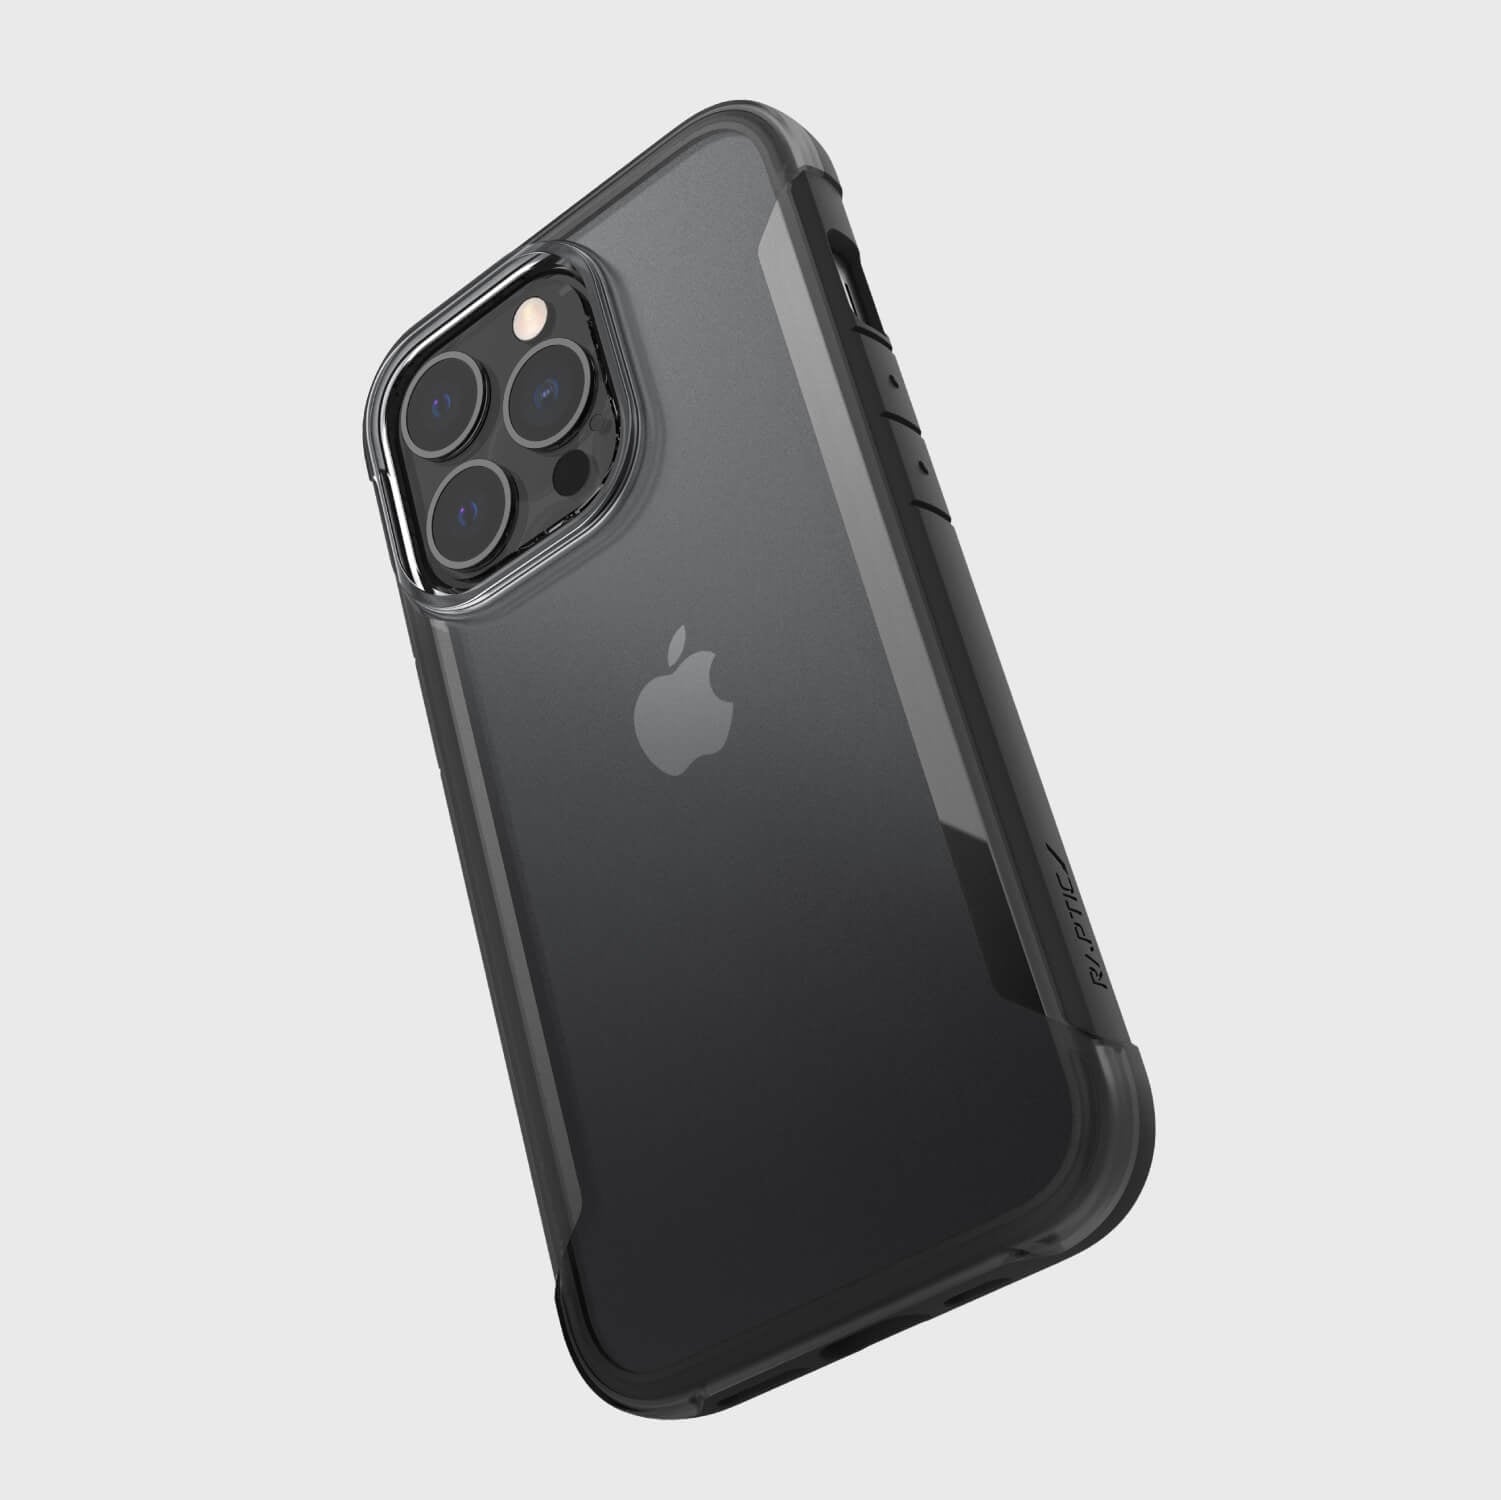 The eco-friendly iPhone 13 Pro Max Case - TERRAIN is shown in black.